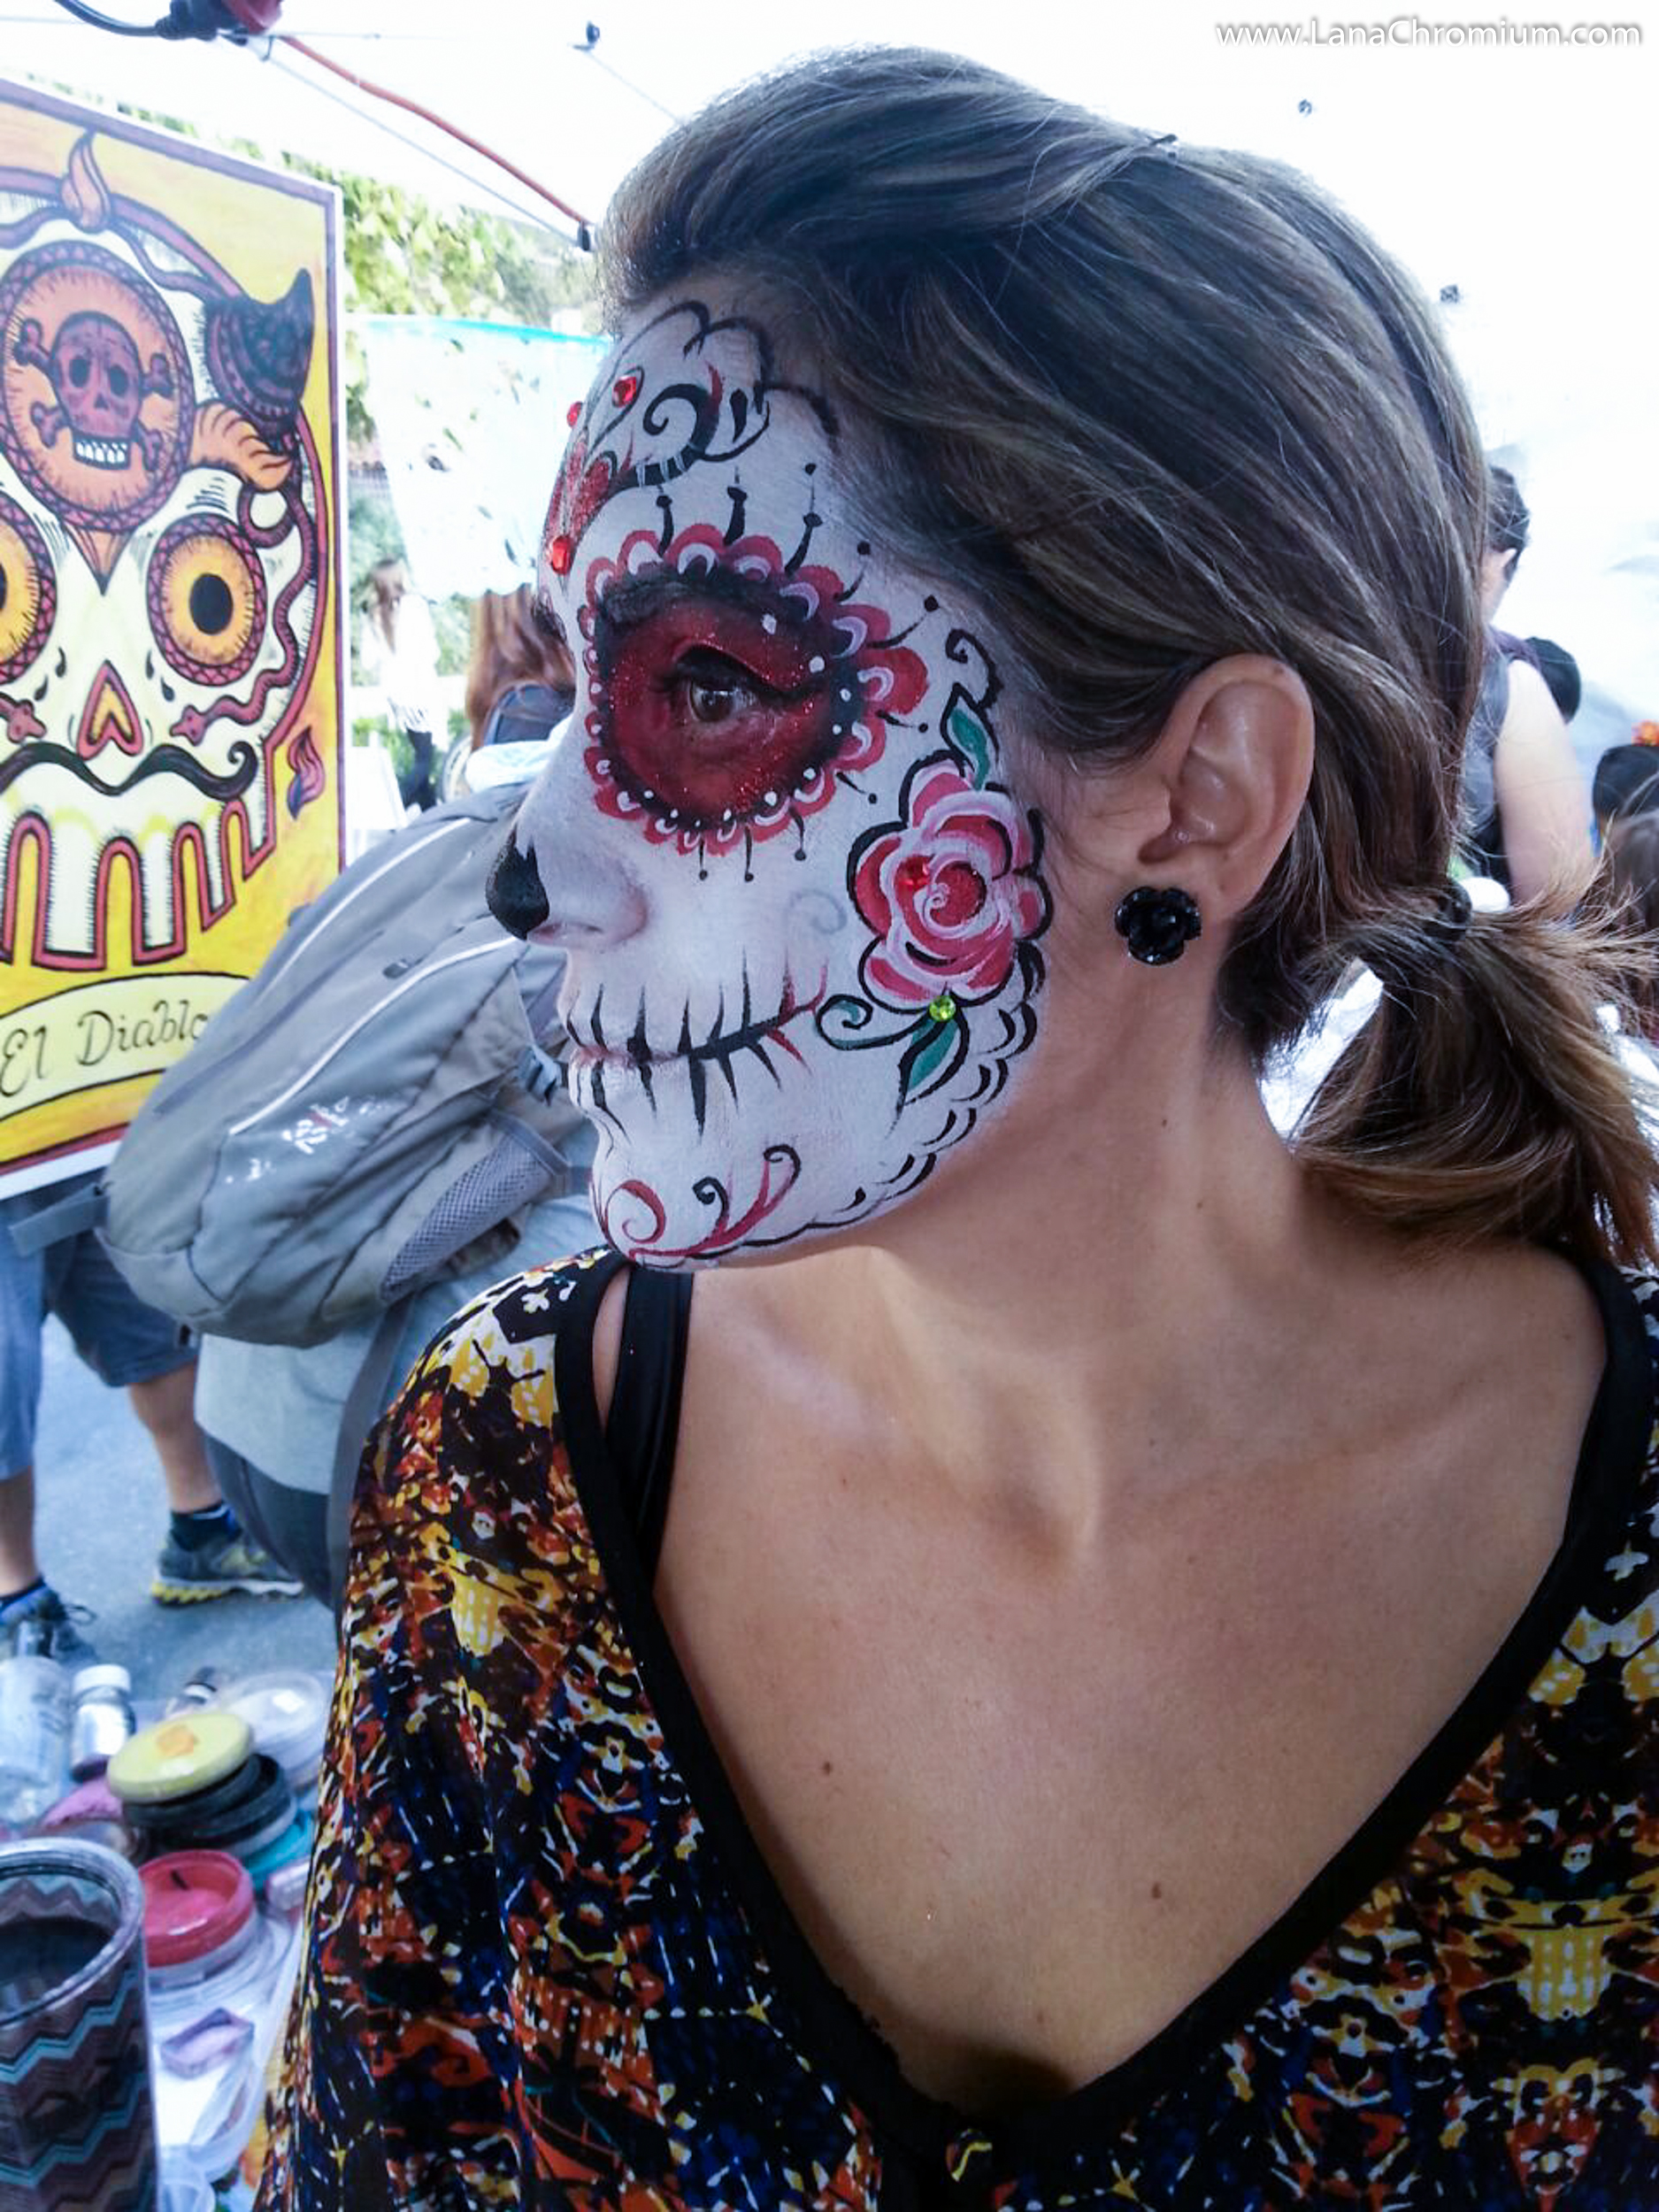 Sugar skull face painting in Old Town! – Cool San Diego Sights!